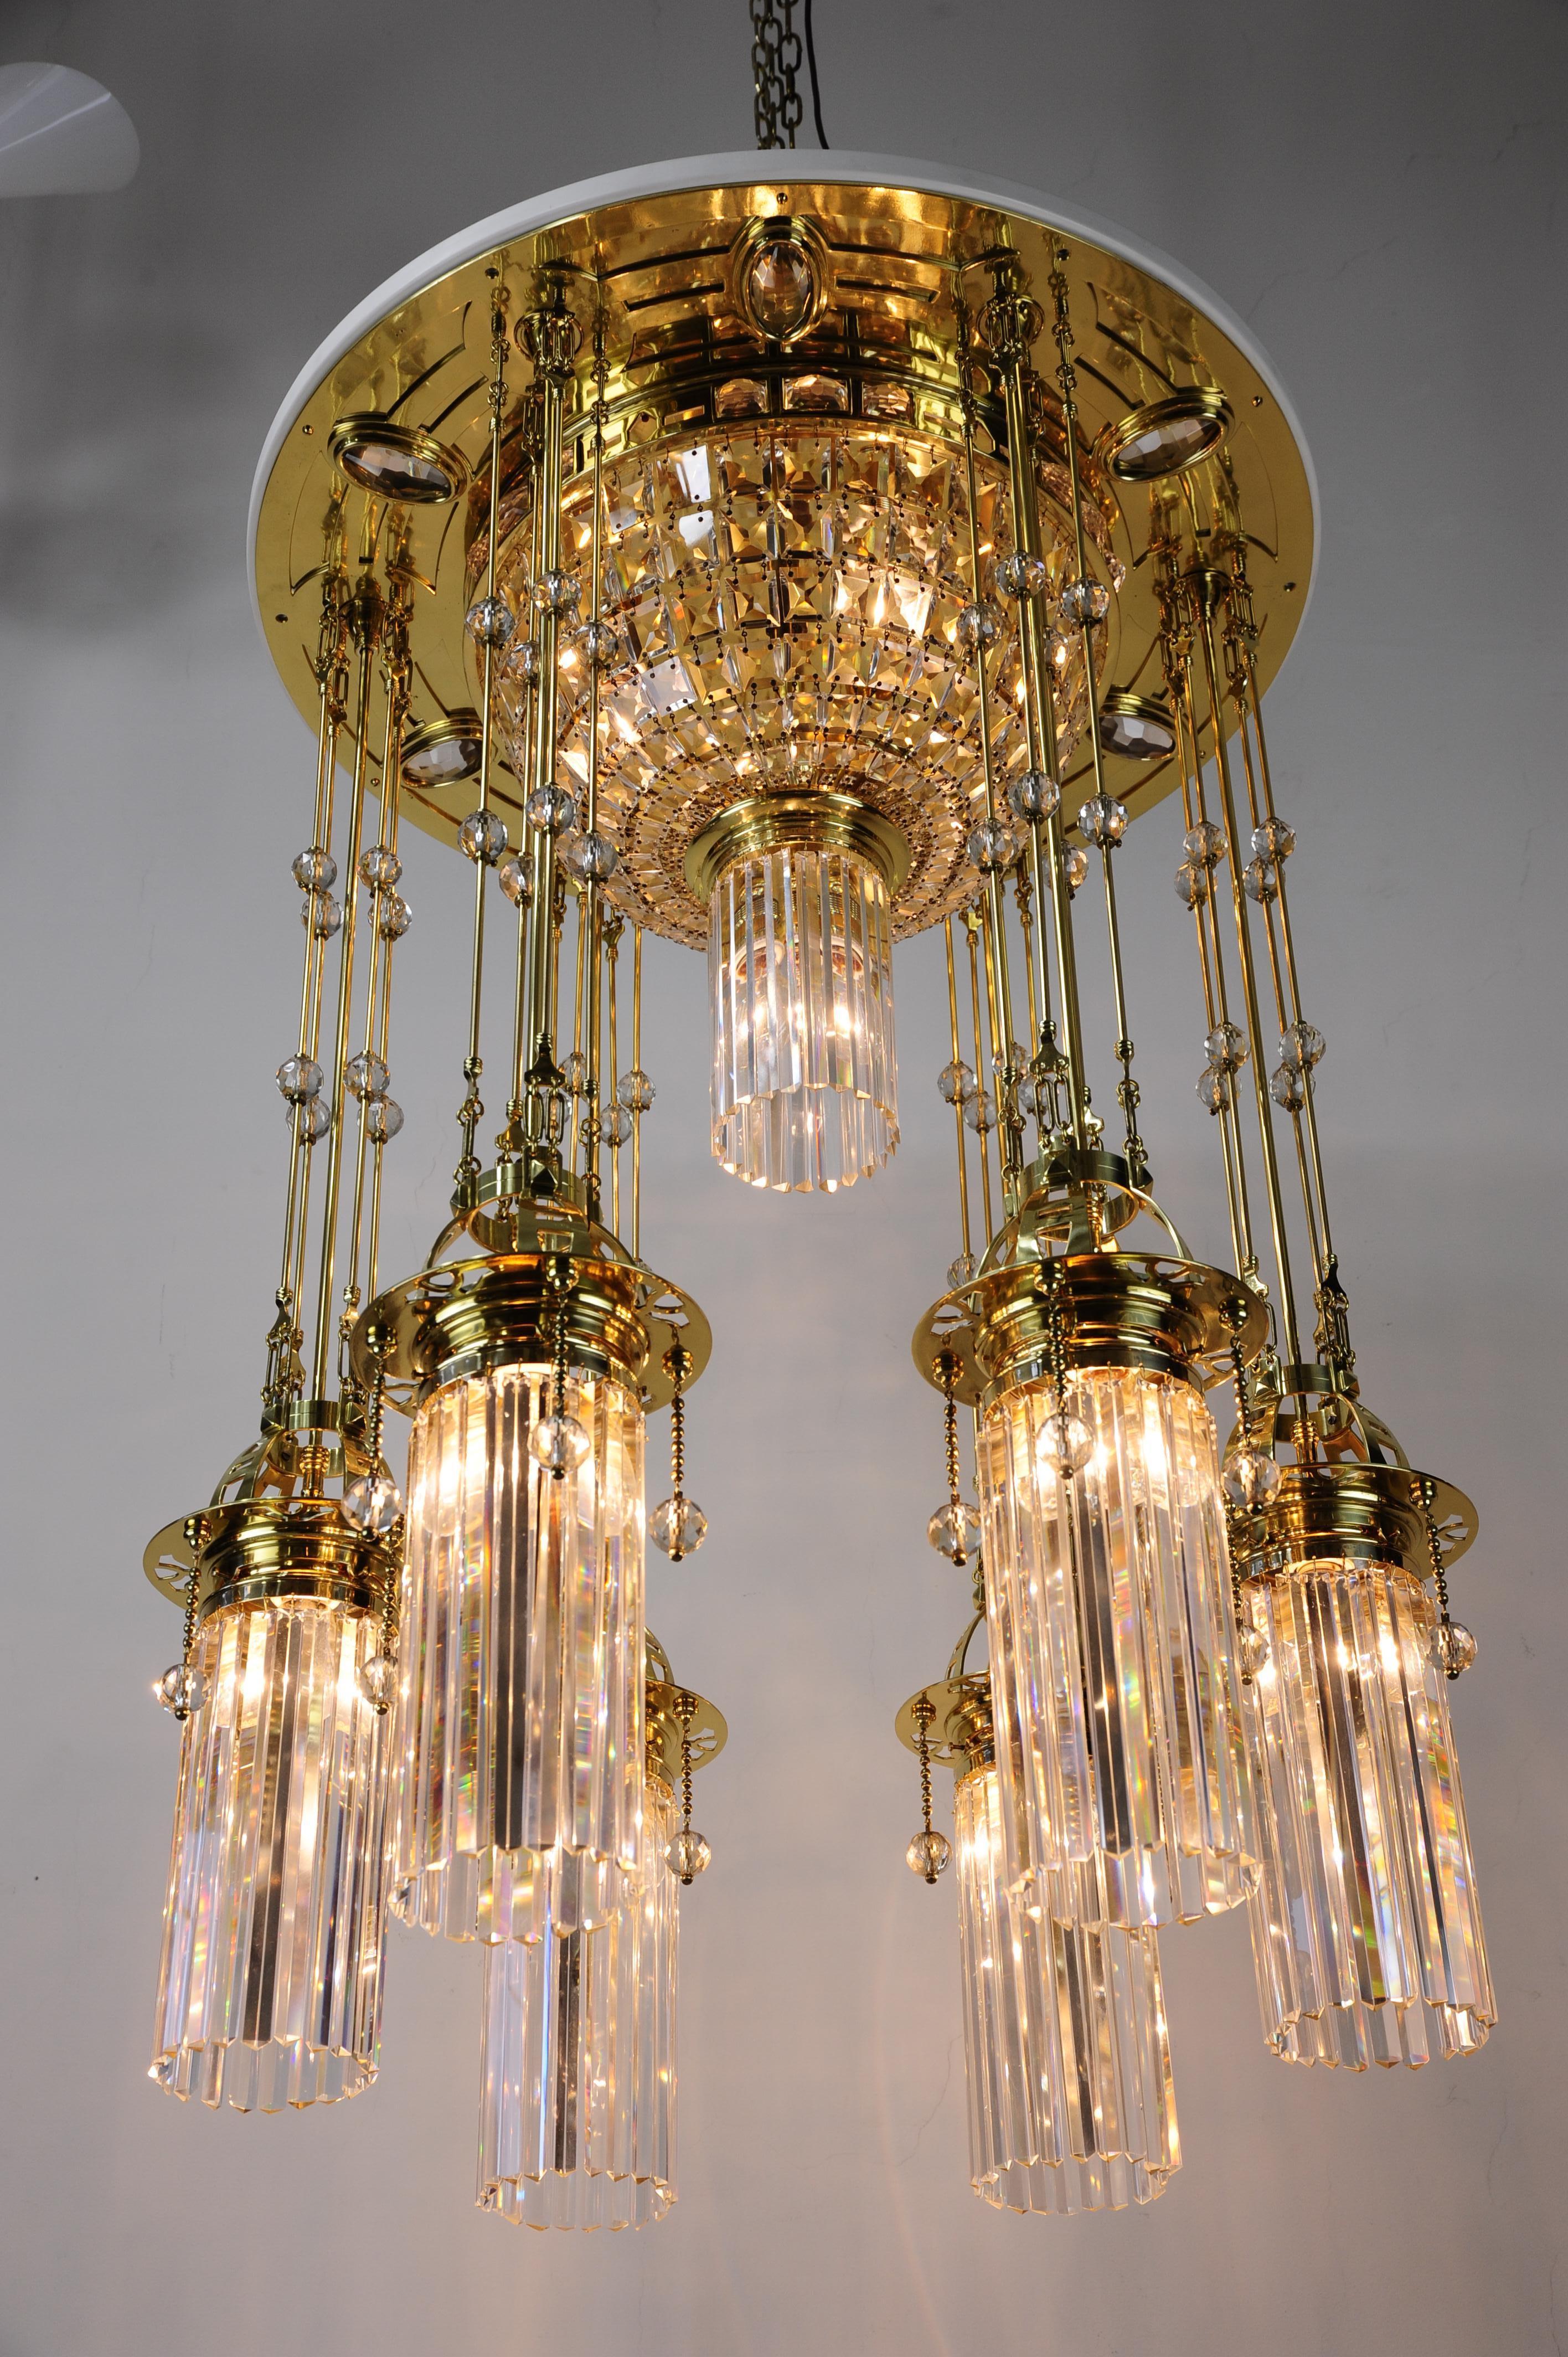 Magnificent and huge Art Deco chandelier Vienna of the 1920s.
Polished brass and stove enameled.
The crystal parts of the chandelier are original.
The chandelier was expertly restored and the crystal was carefully cleaned by hand.
The chandelier